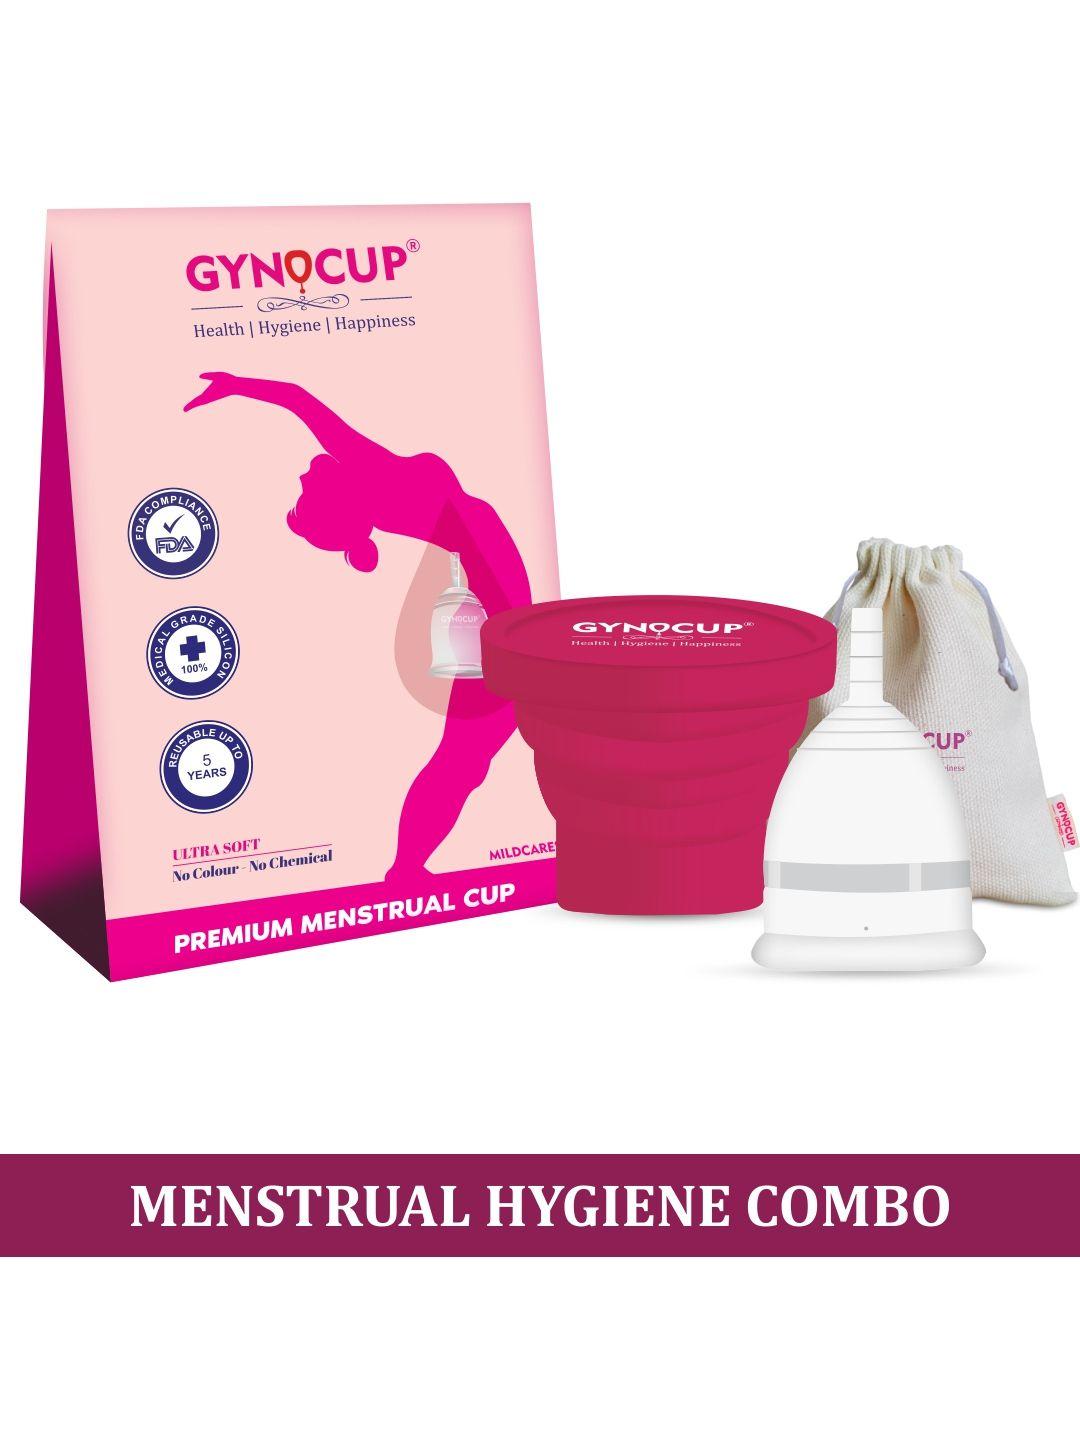 gynocup small size premium menstrual cup with menstrual cup sterilizer container-pink